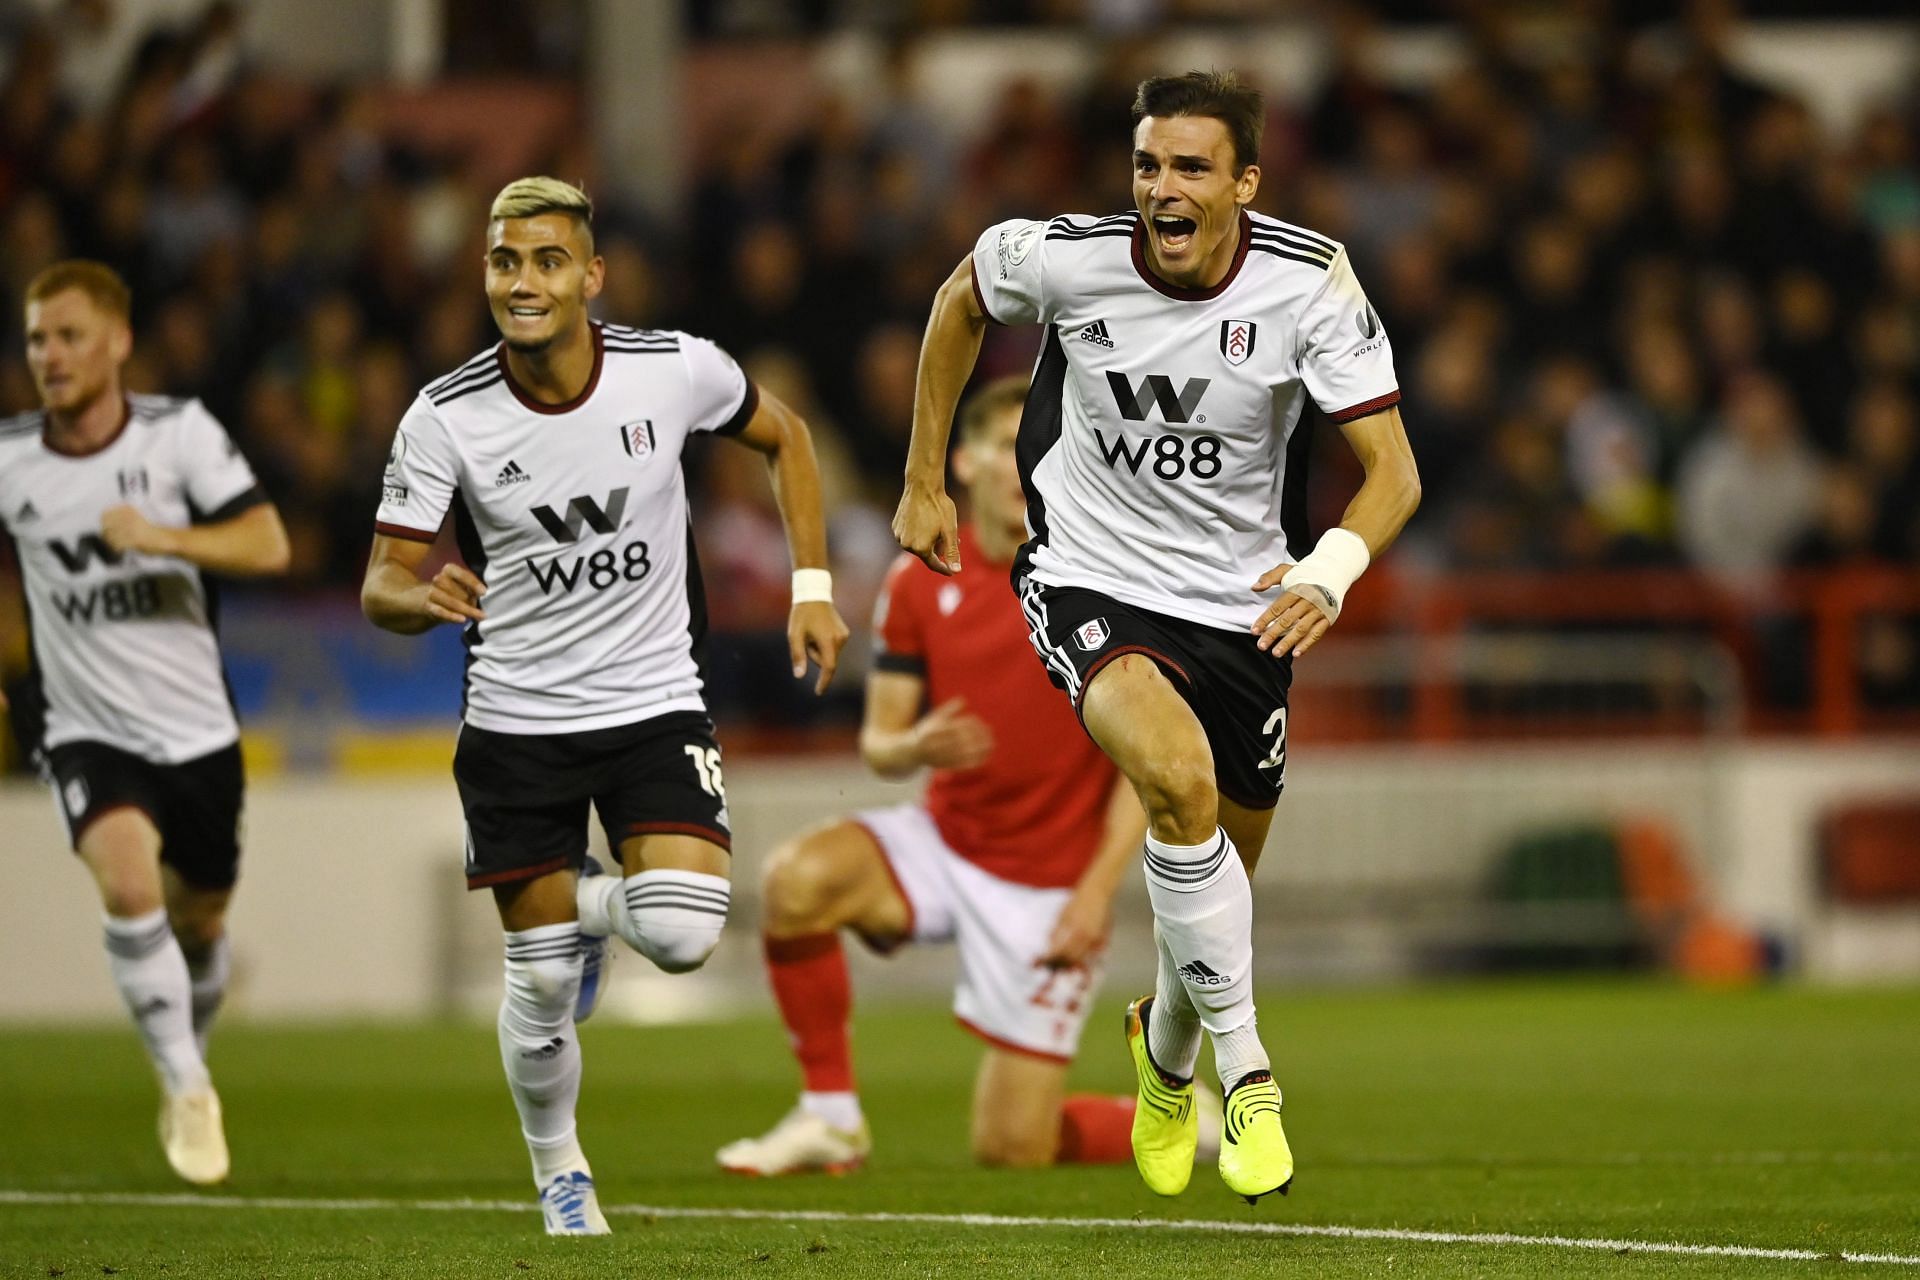 Joao Palhinha impressed with his performances for Fulham